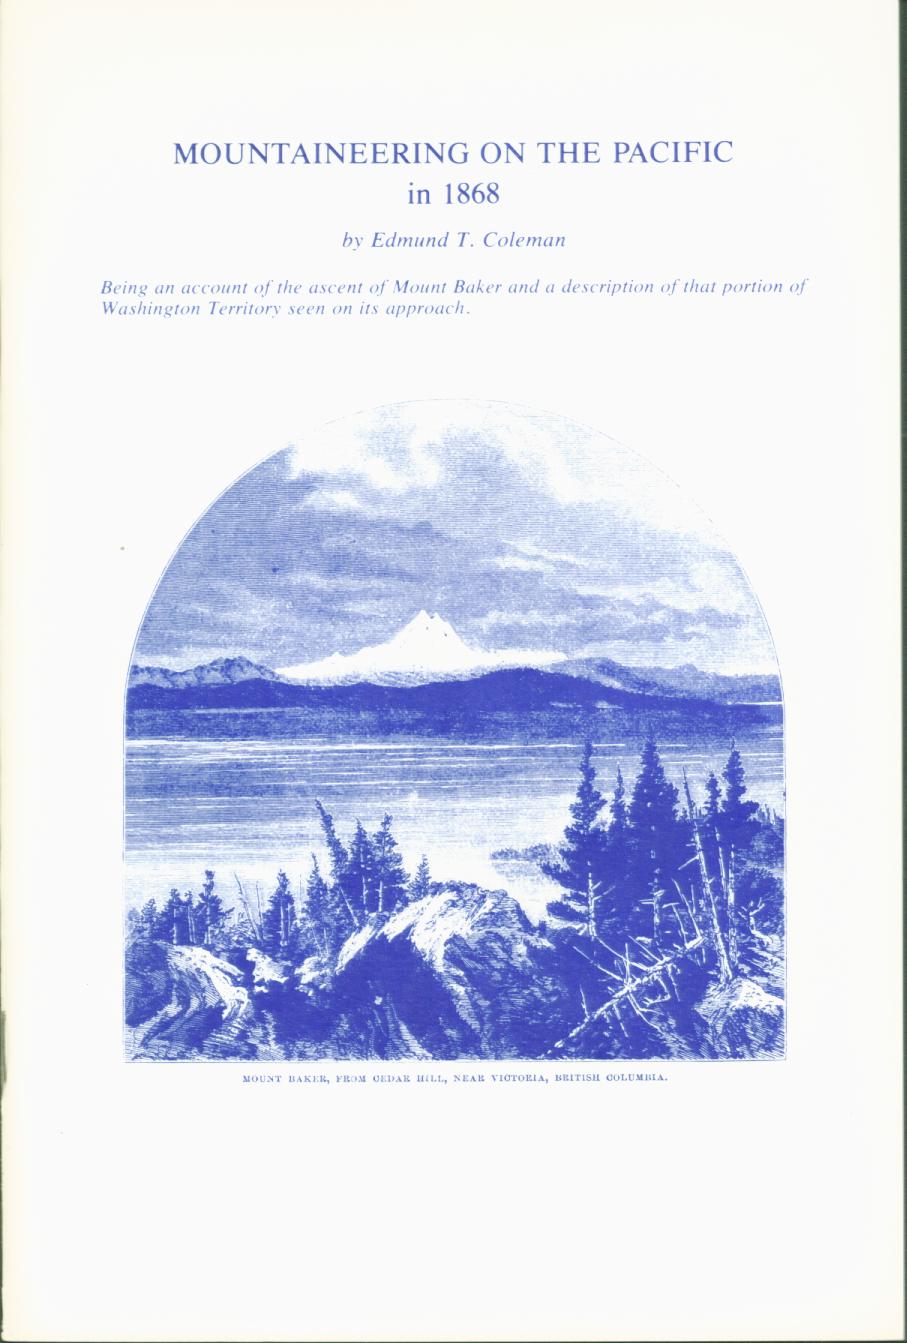 Mountaineering on the Pacific in 1868--ascent of Mt. Baker.